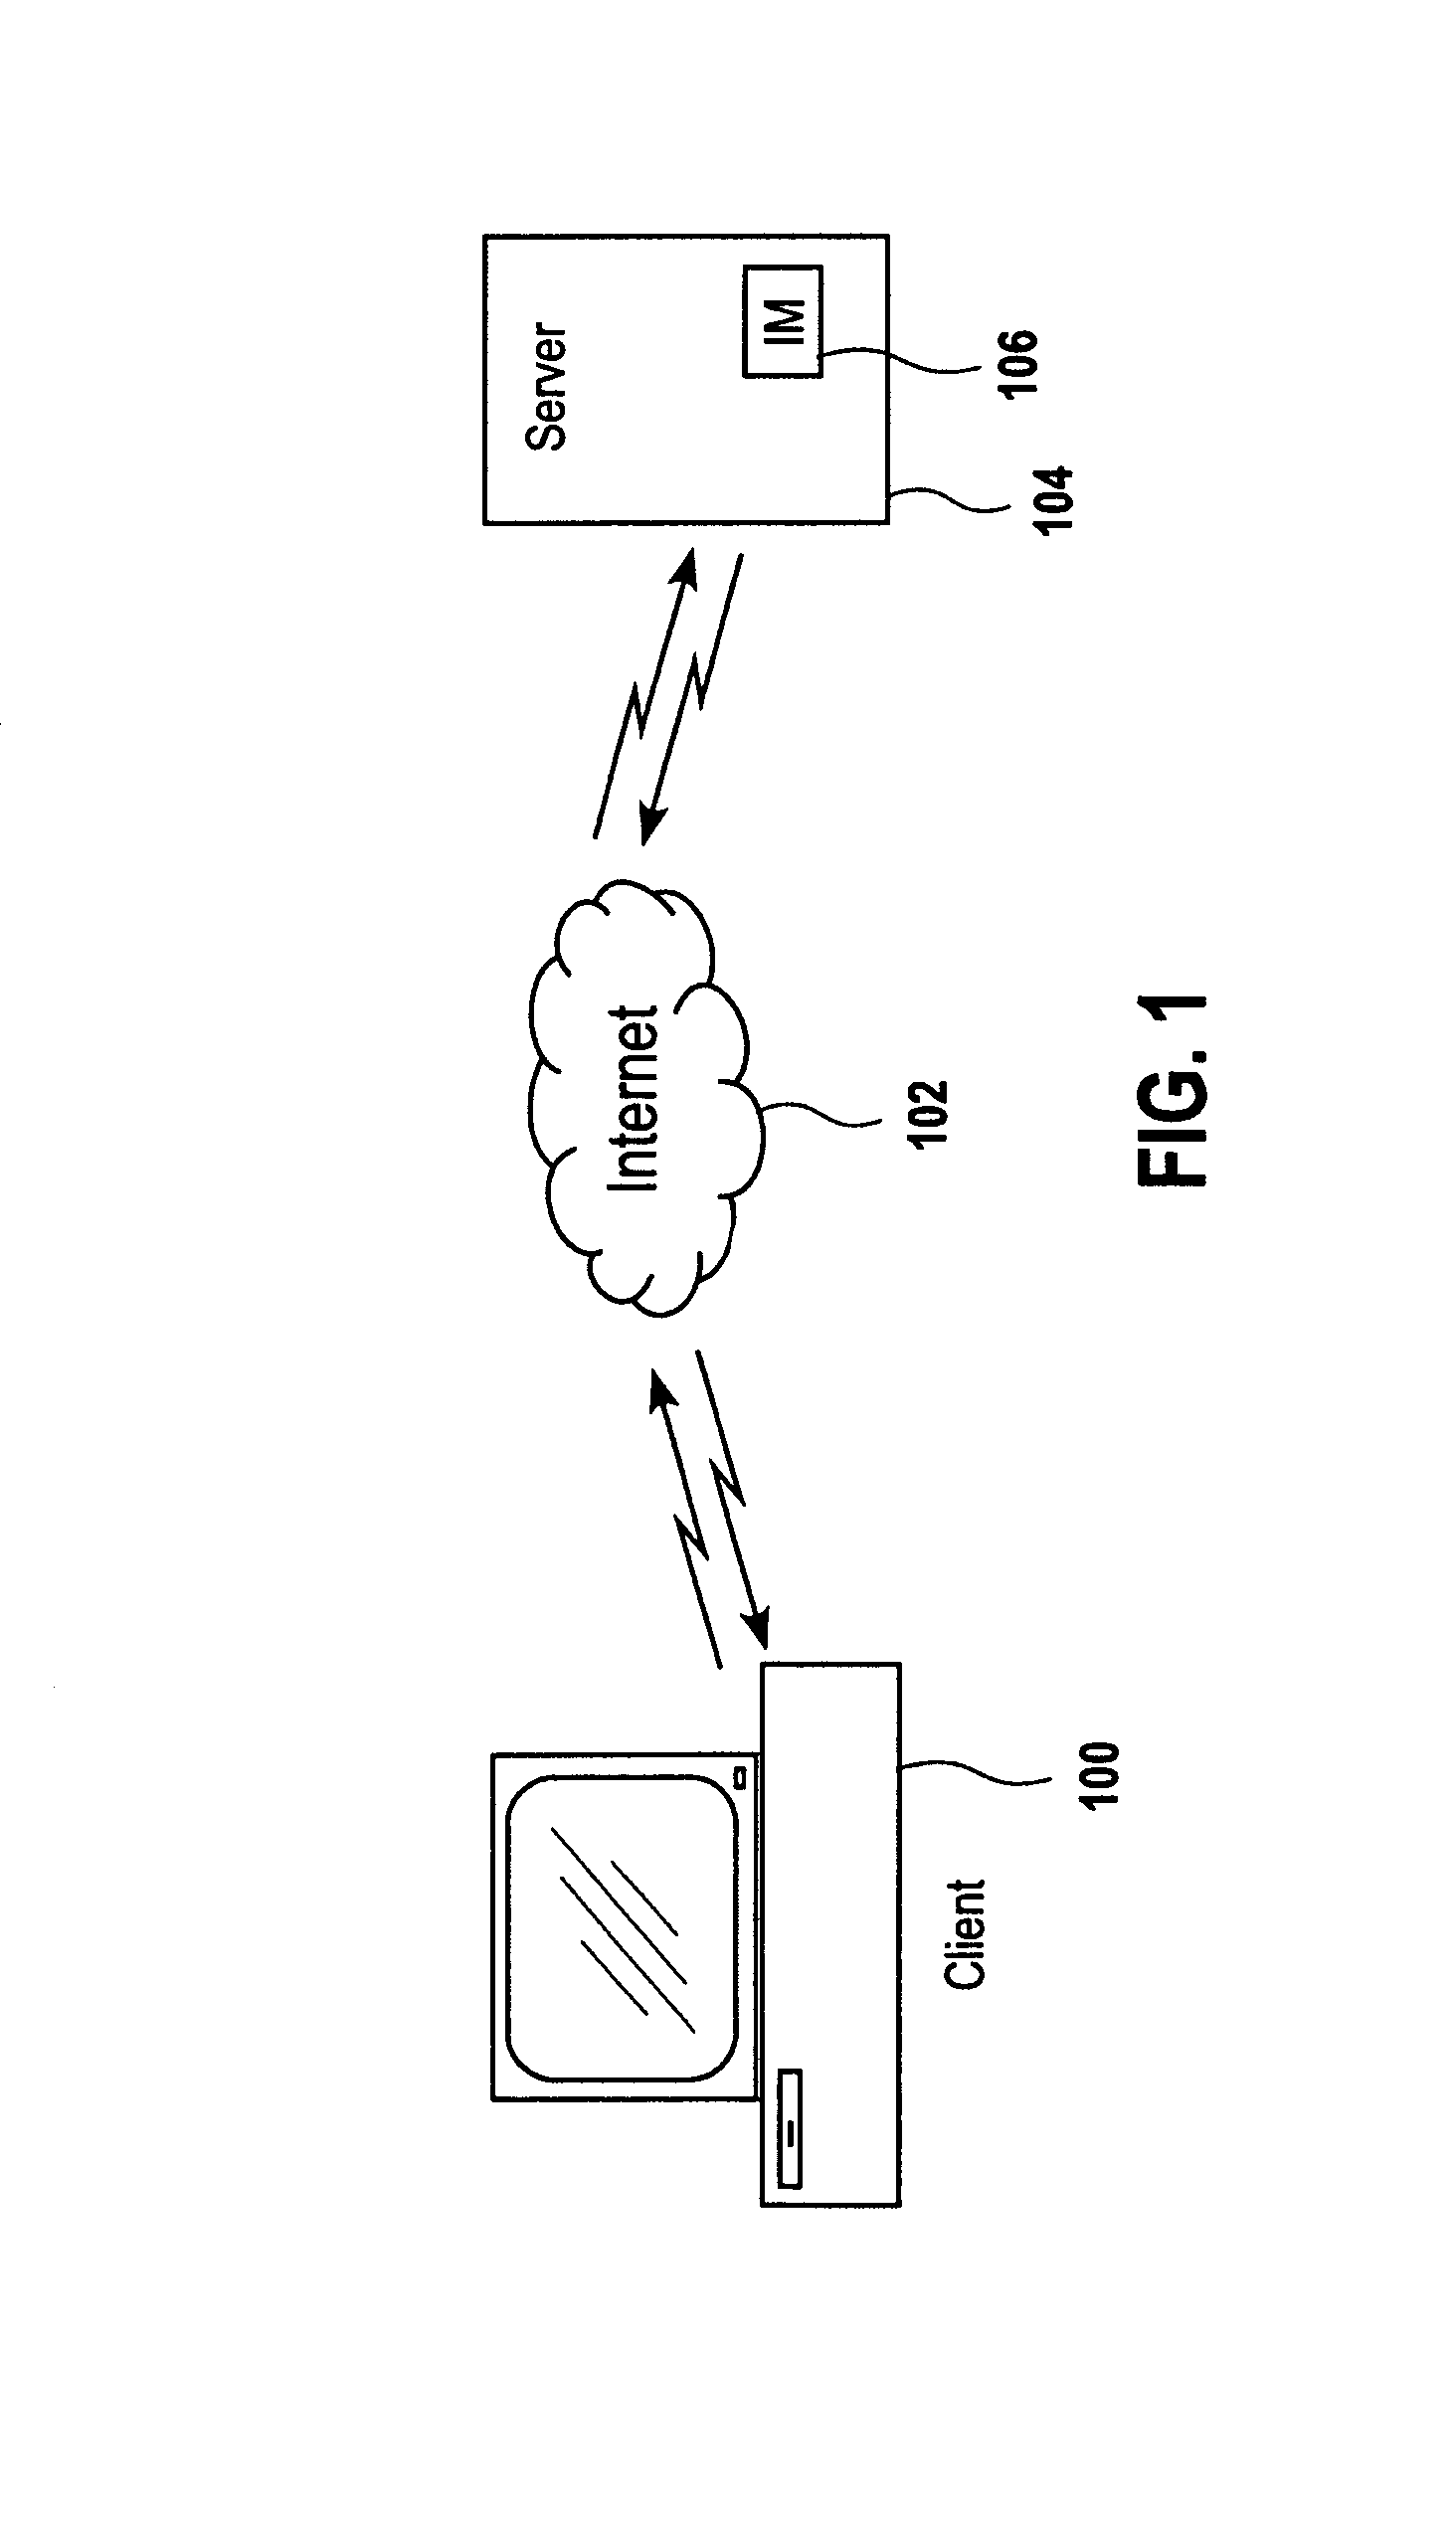 Speech-enabled language translation system and method enabling interactive user supervision of translation and speech recognition accuracy